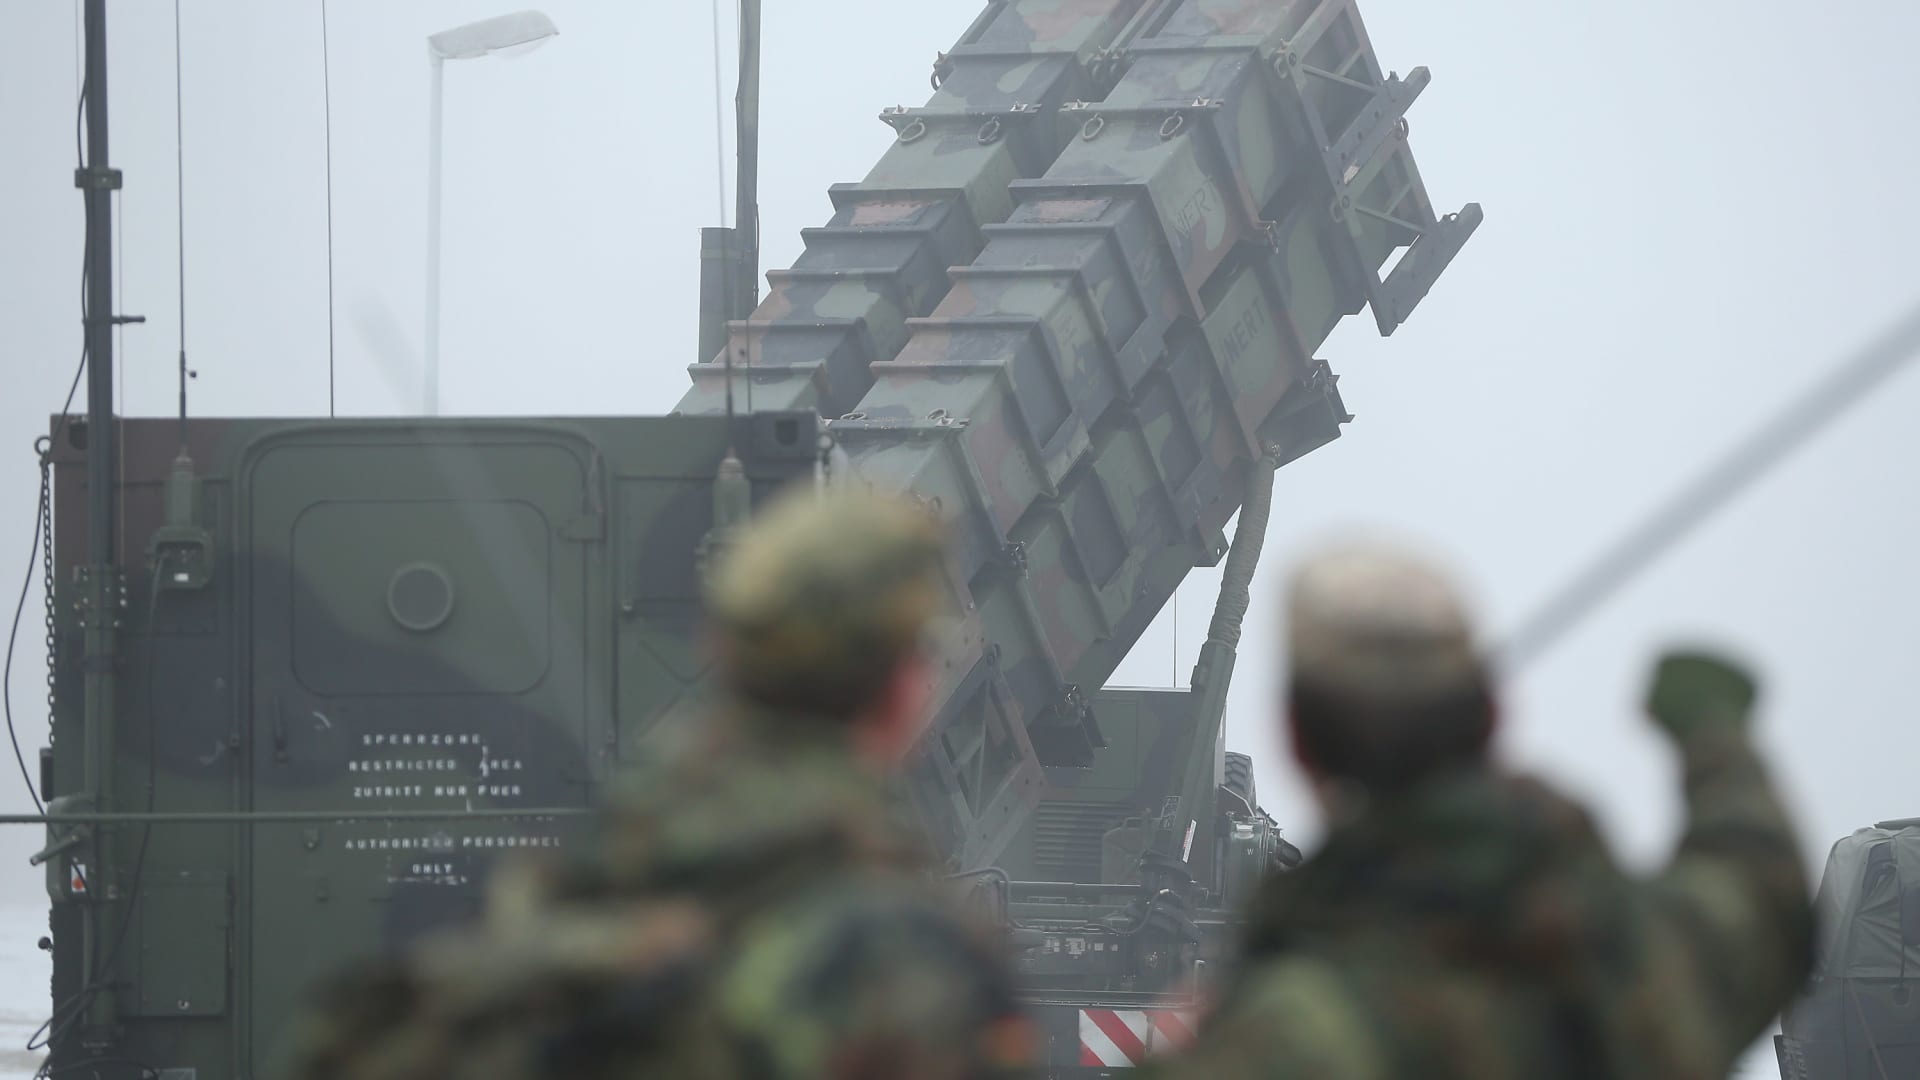 Ukraine war live updates: Russia warns U.S. of 'unpredictable consequences' if it sends Patriot missile systems to Ukraine